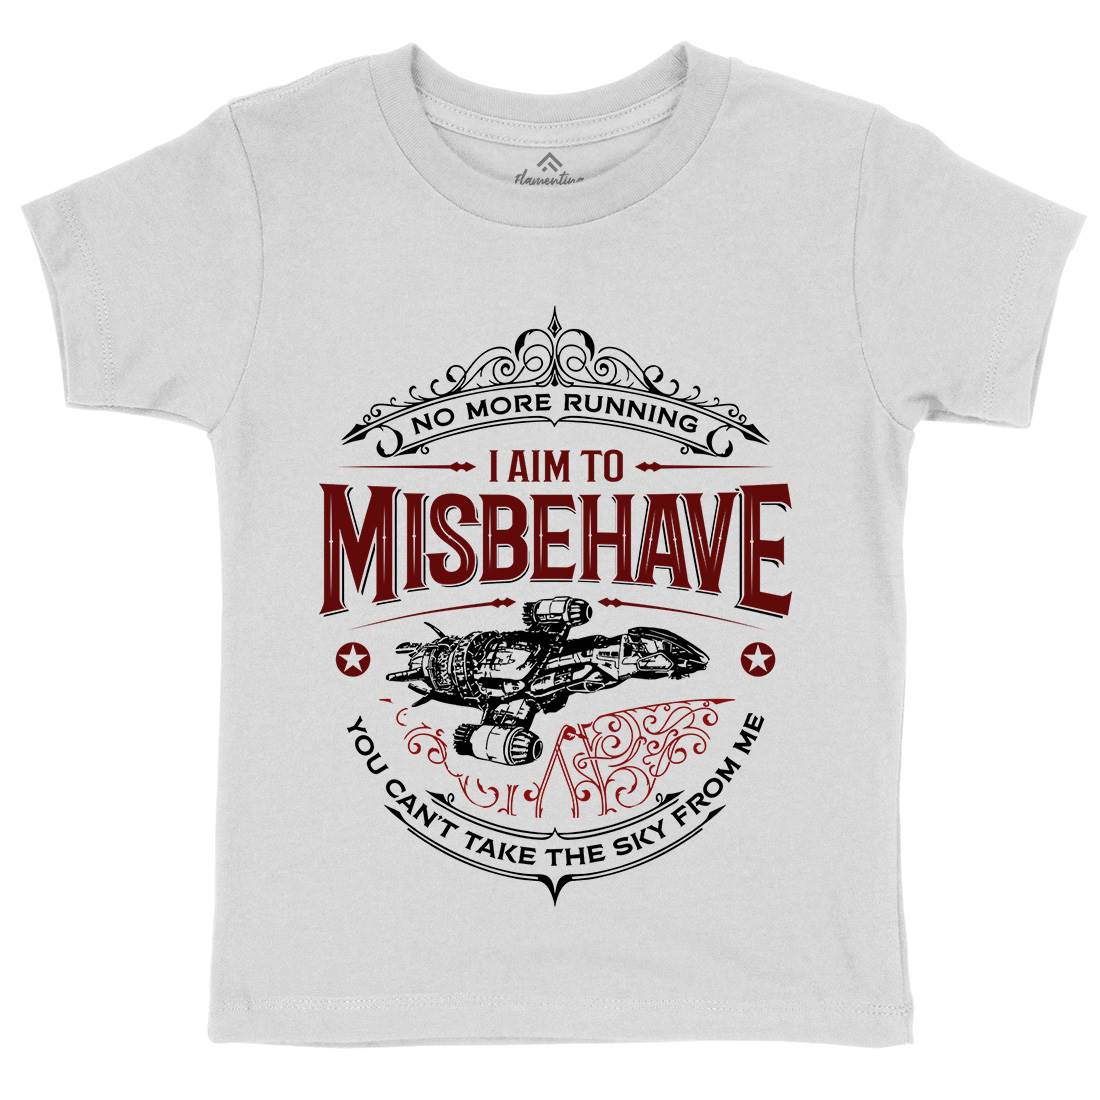 I Aim To Misbehave Kids Organic Crew Neck T-Shirt Space D435